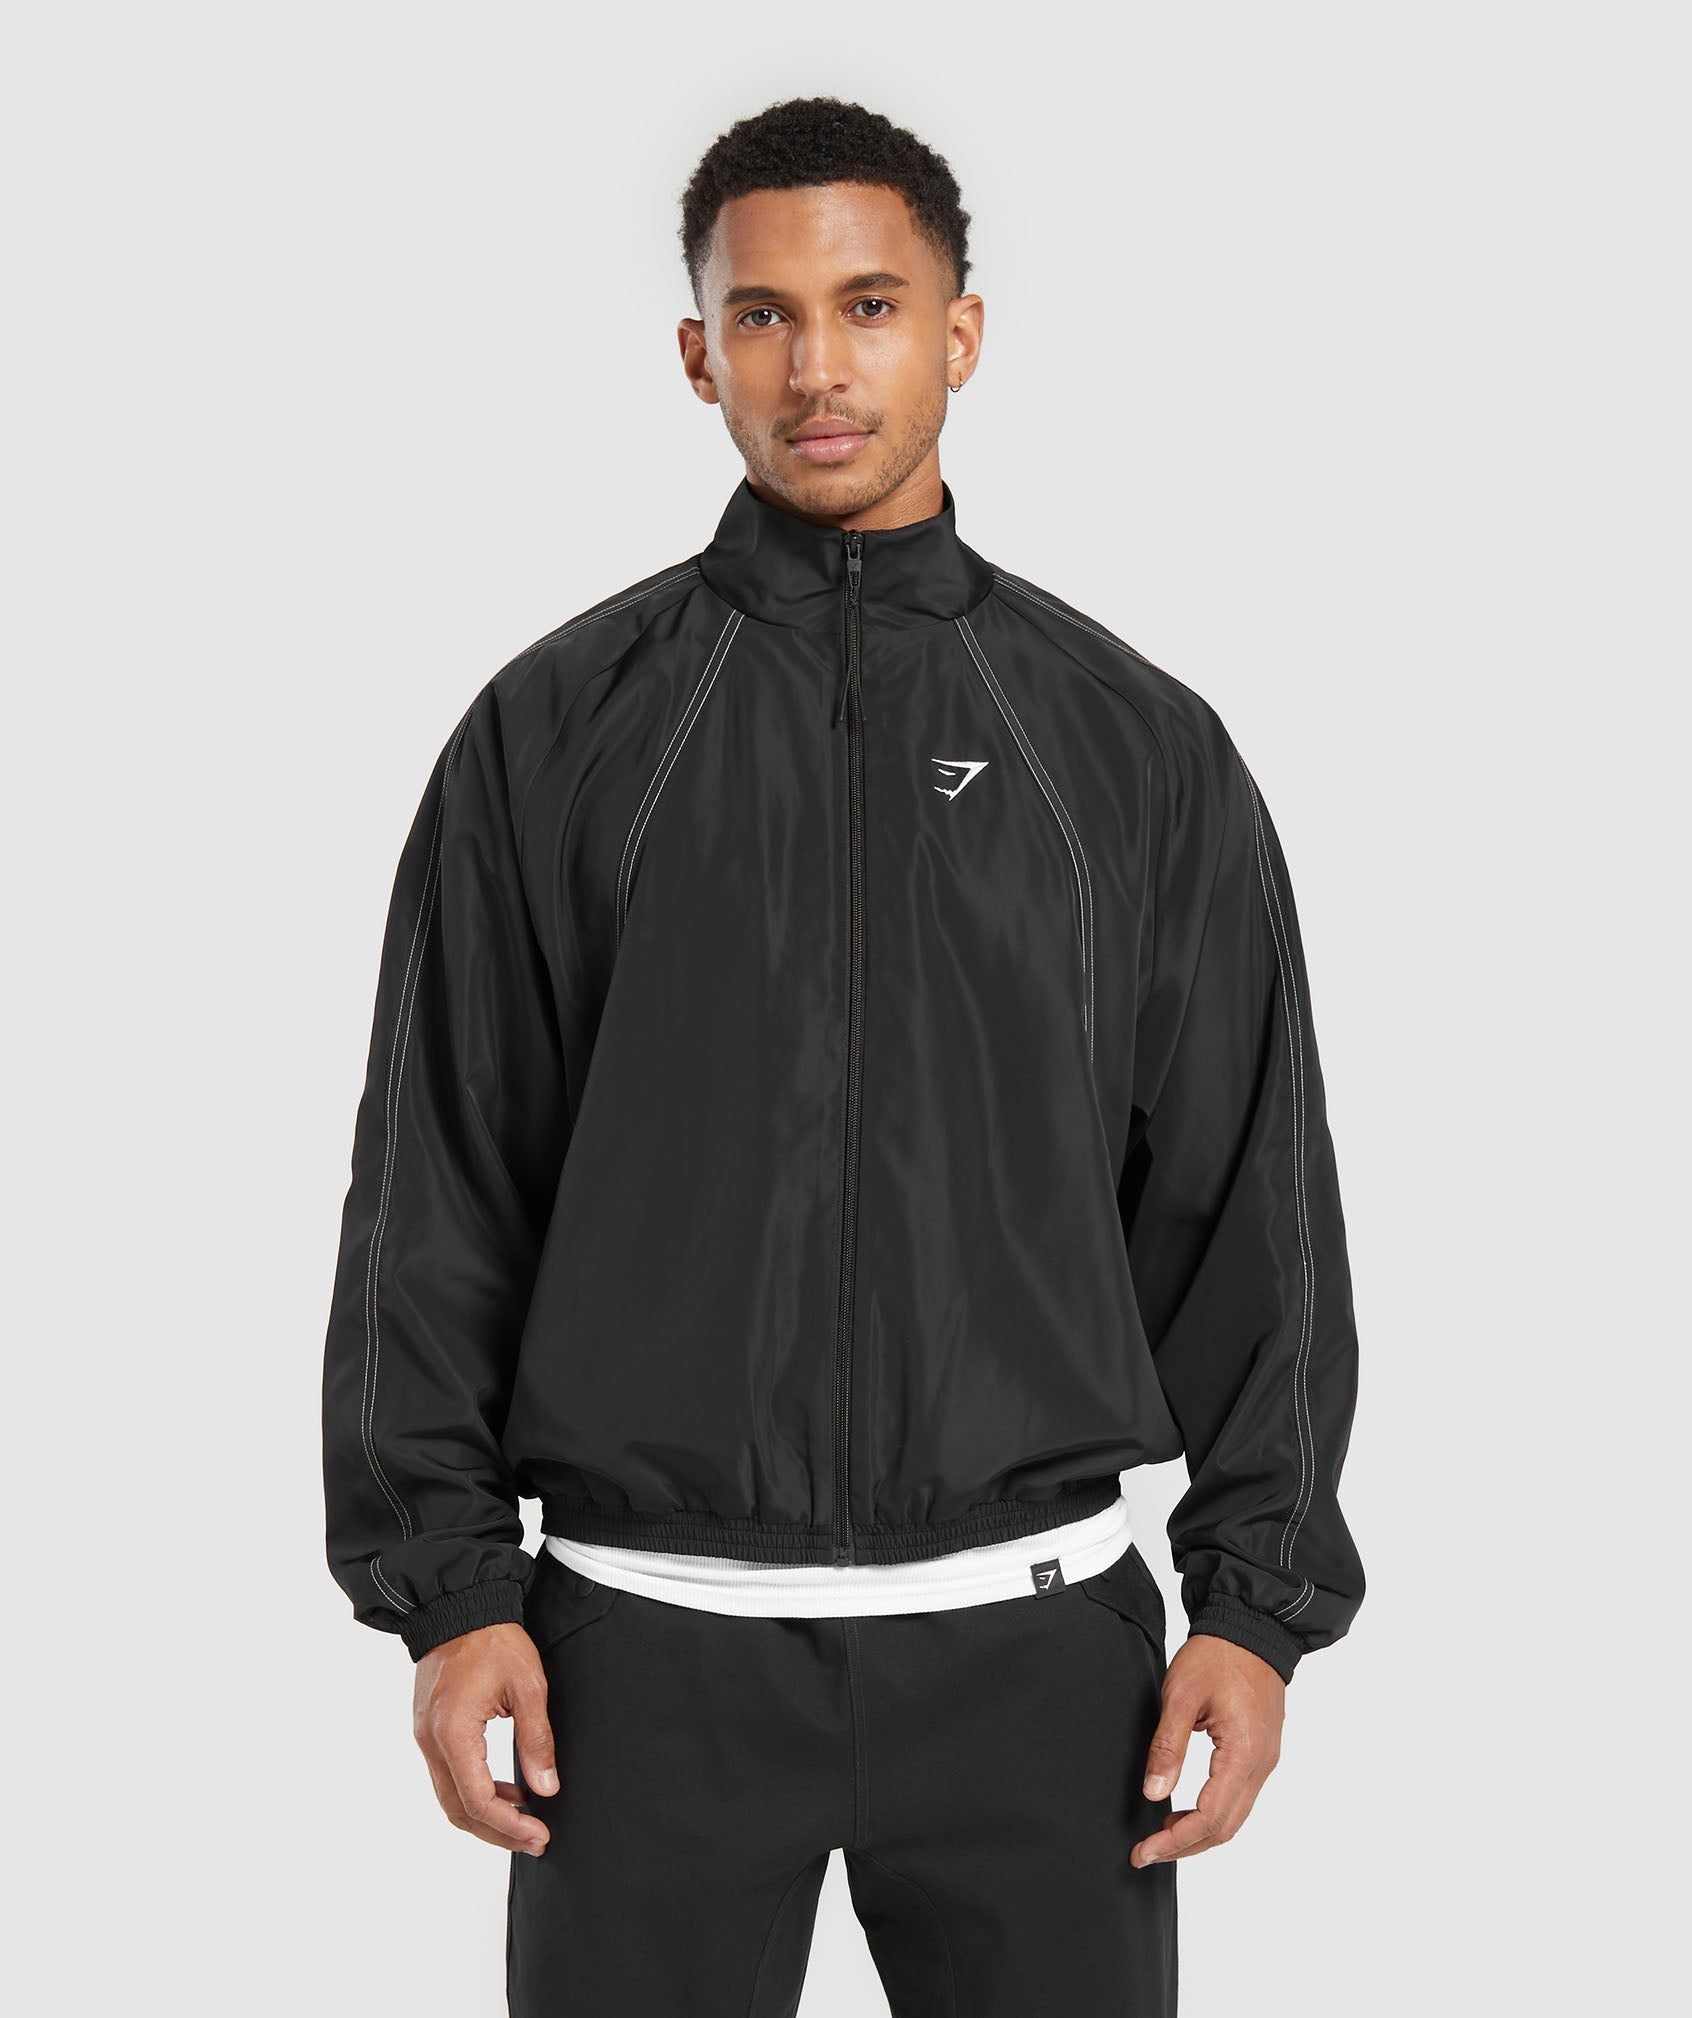 Track Top in Black - view 1